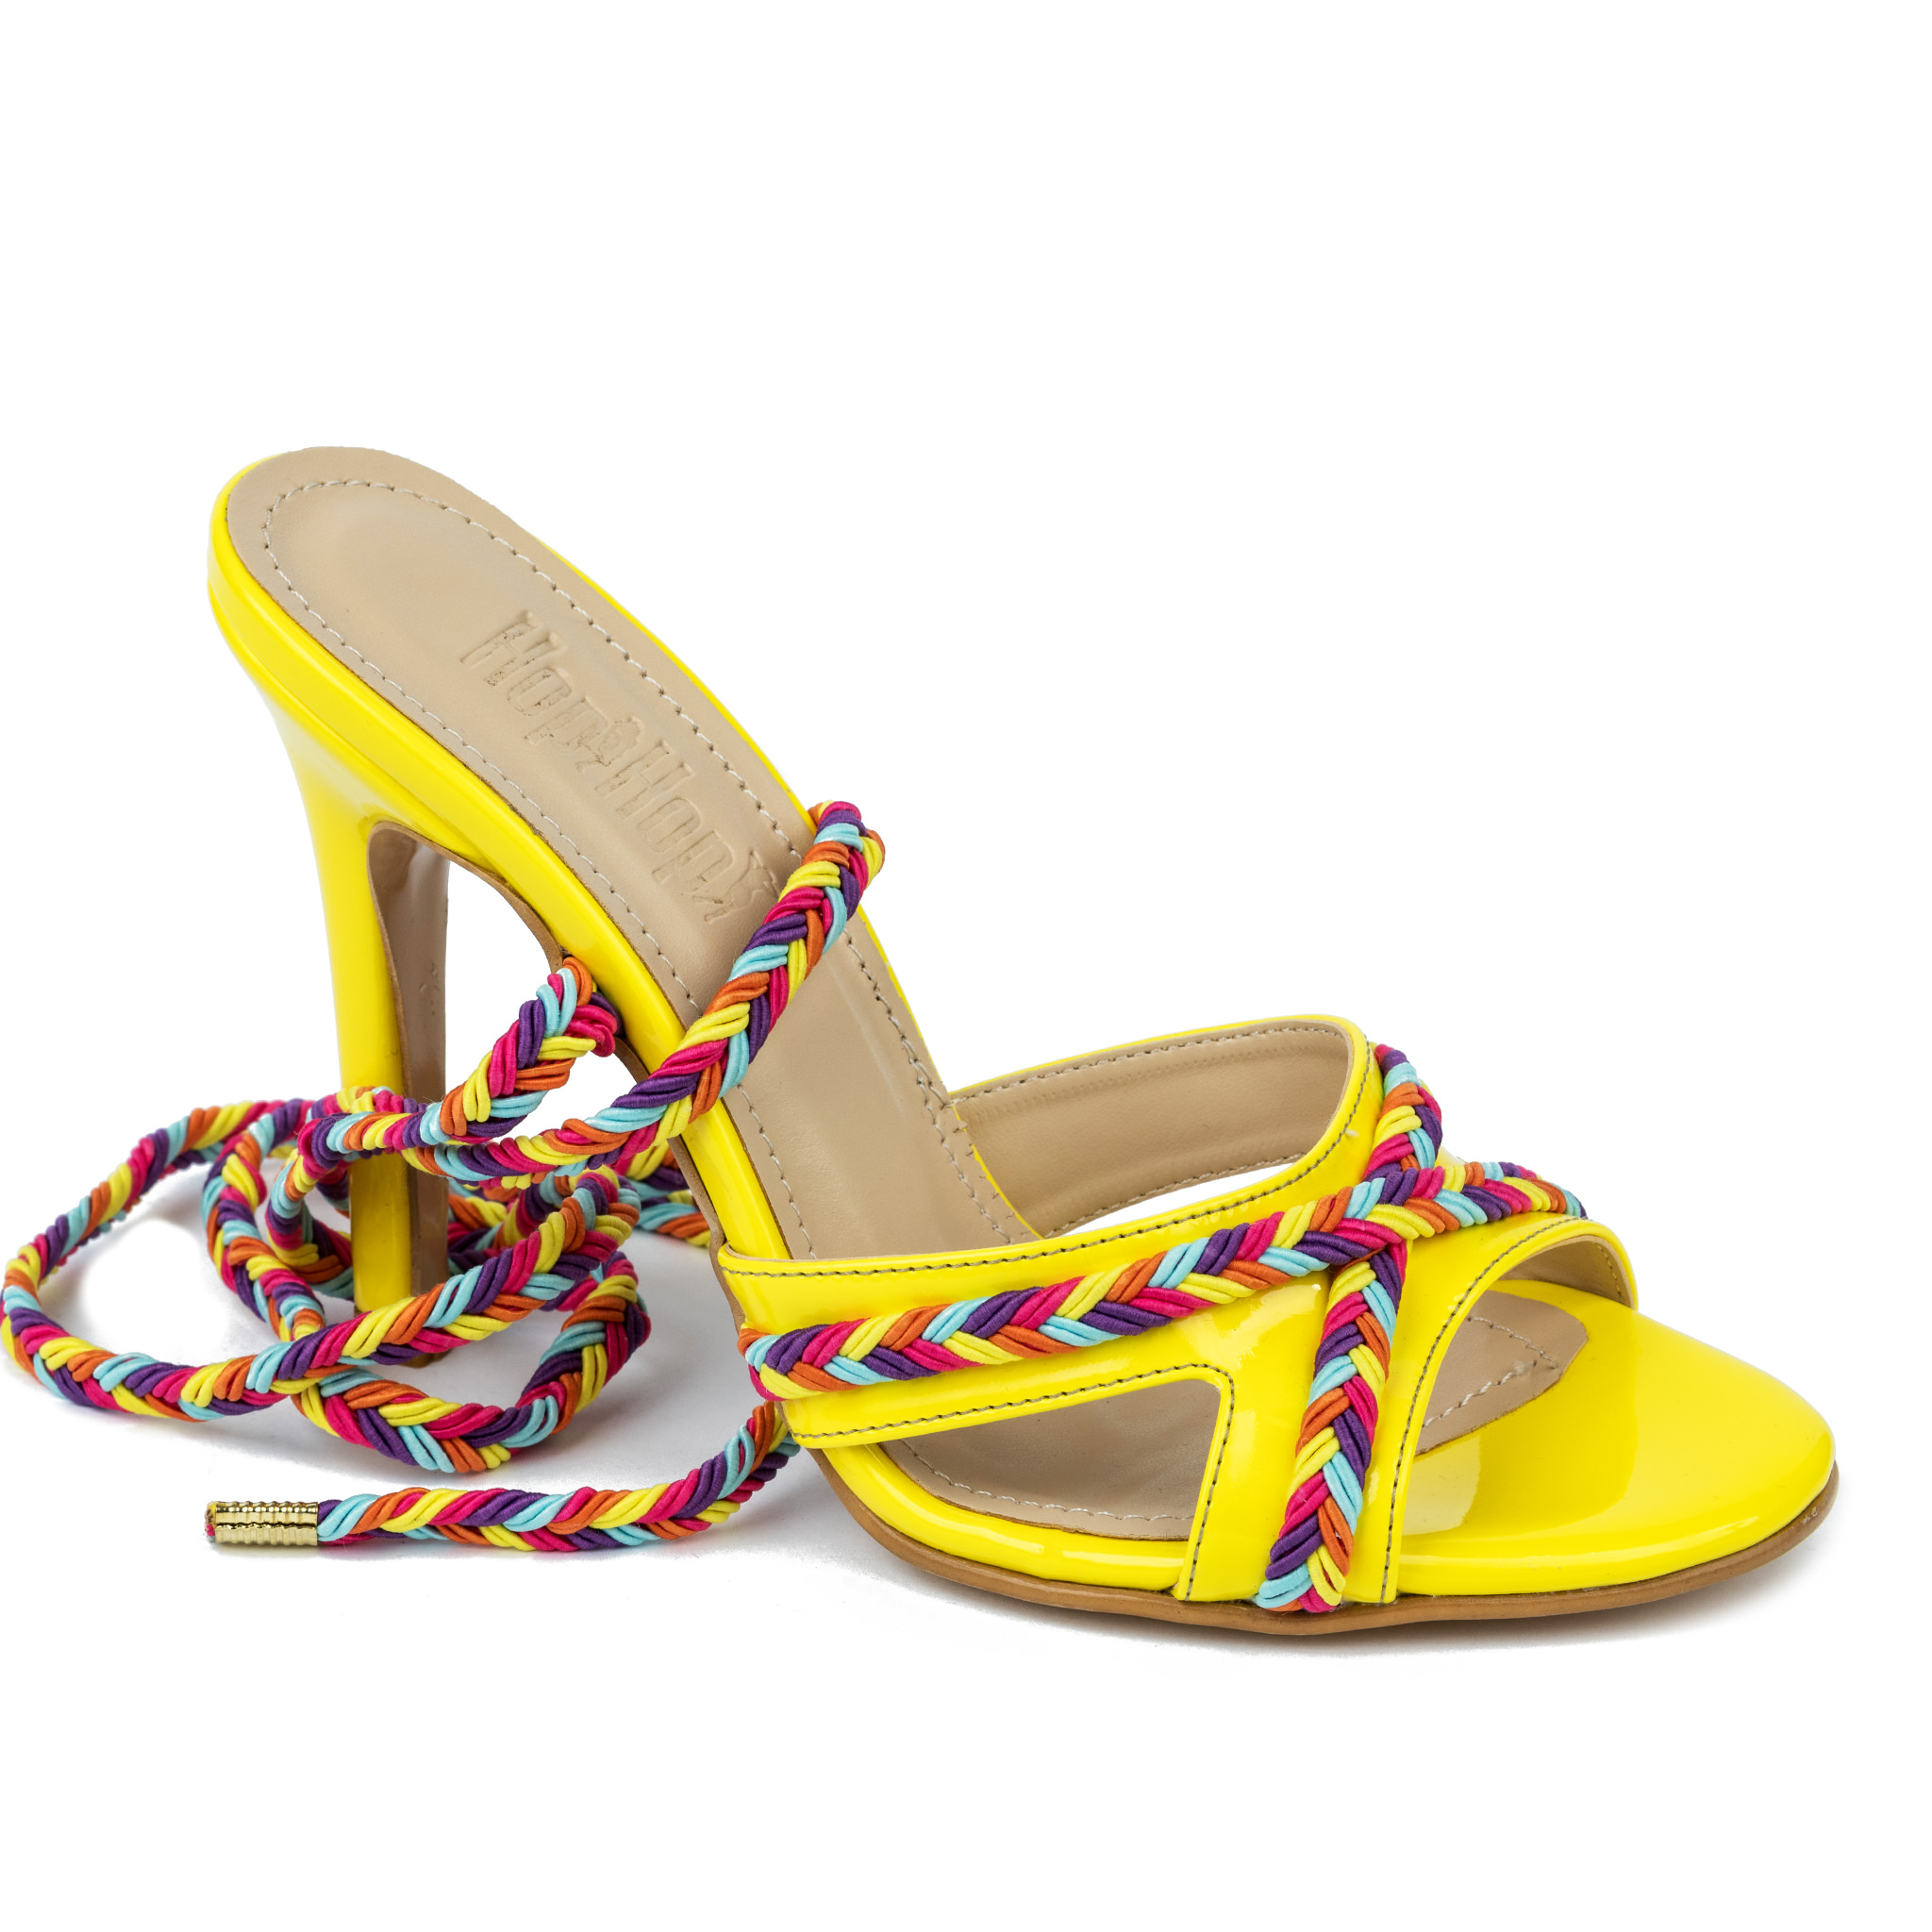 LACE UP SANDALS THIN HEEL - YELLOW